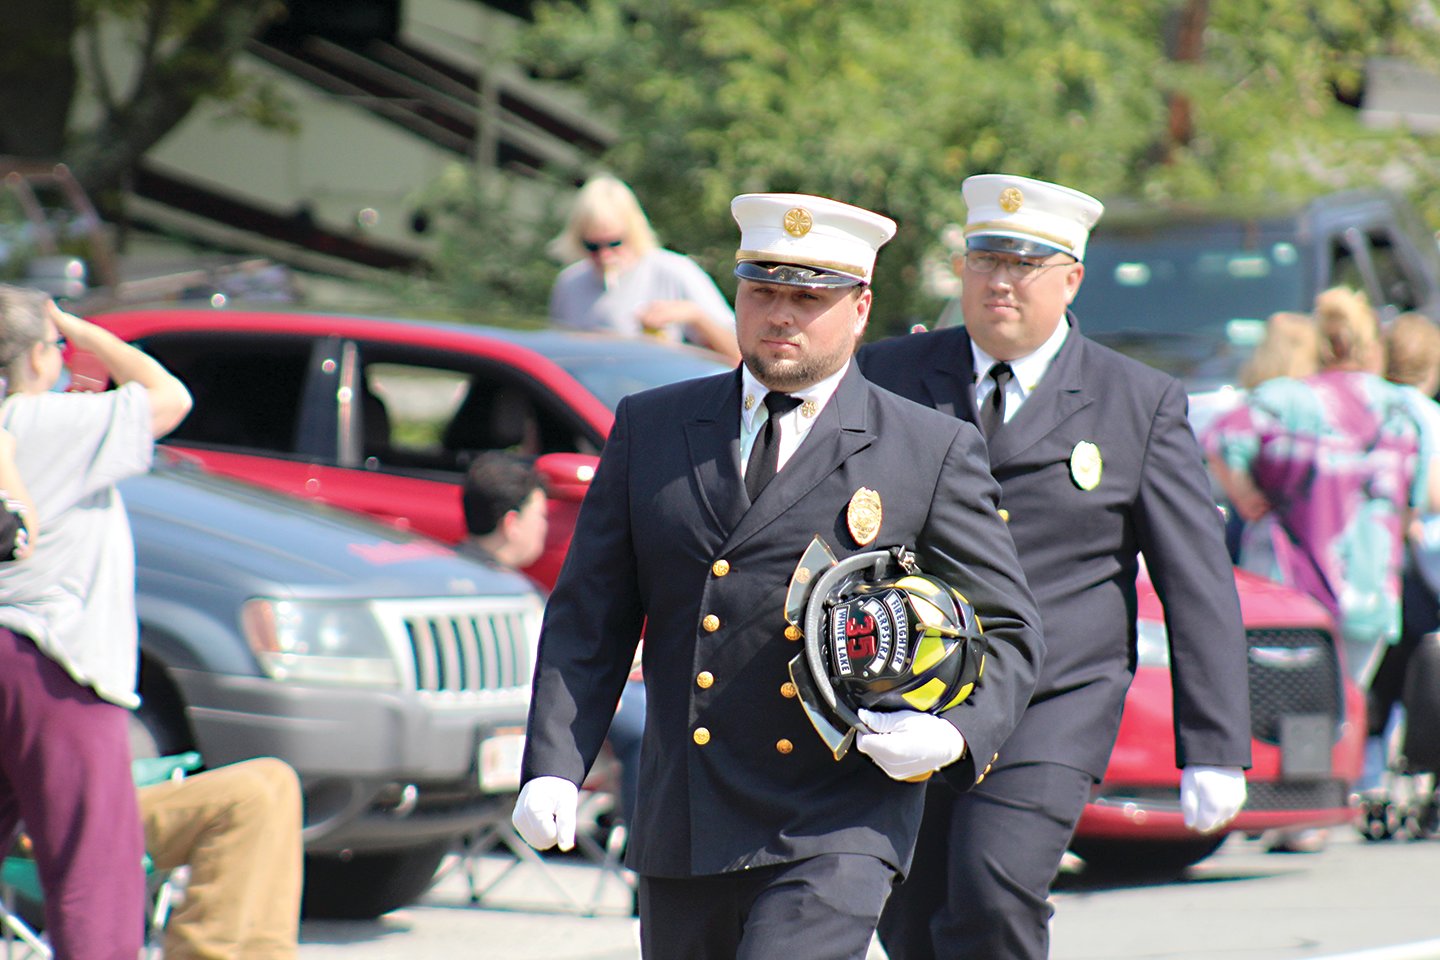 White Lake Fire Chief Joshua Cunningham carries the helmet of the late Aaron Terpstra, who passed away in February.  Marching behind Chief Cunningham is his brother and 1st Assistant Chief Shane Cunningham.